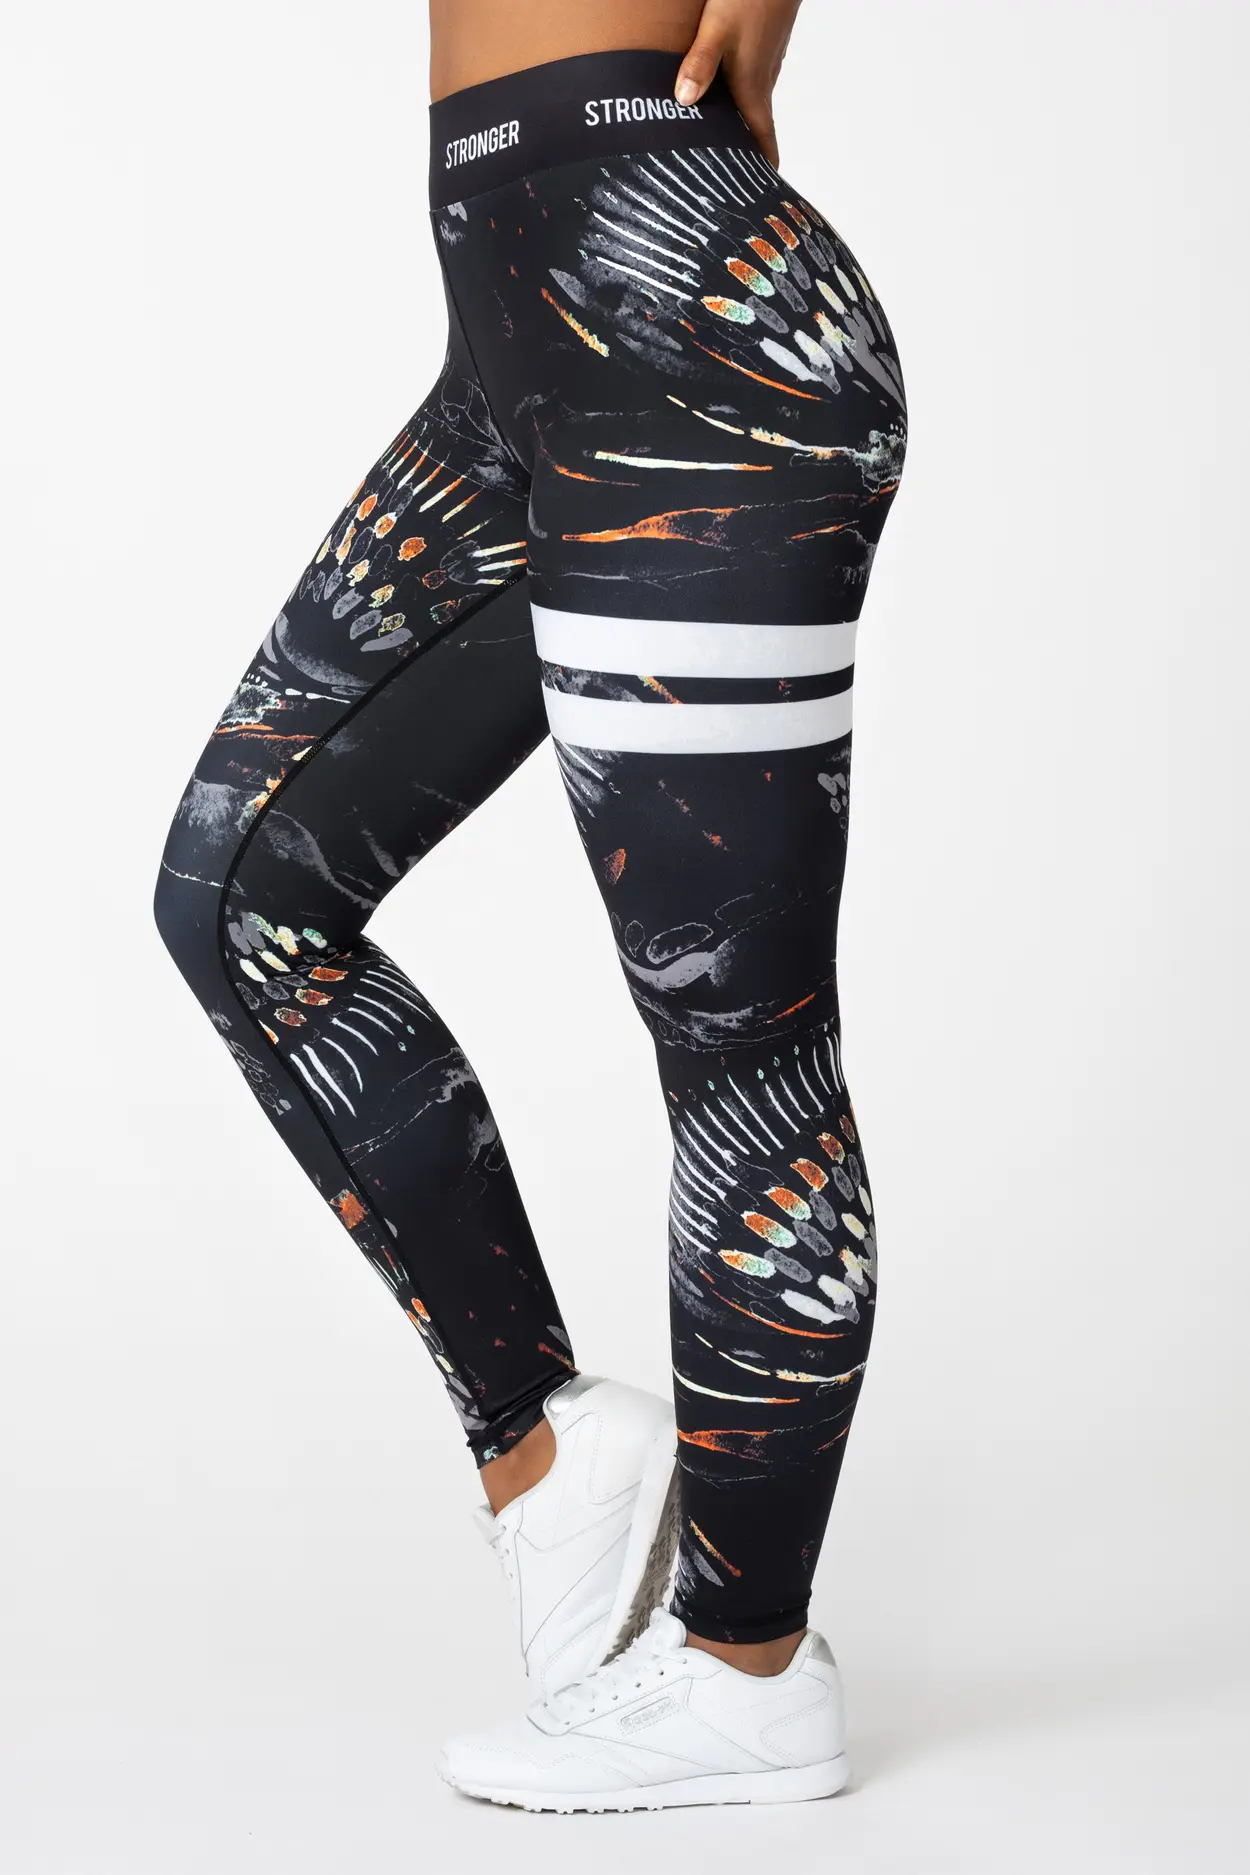 Skinnify workout legging’s (6 resistant bands )